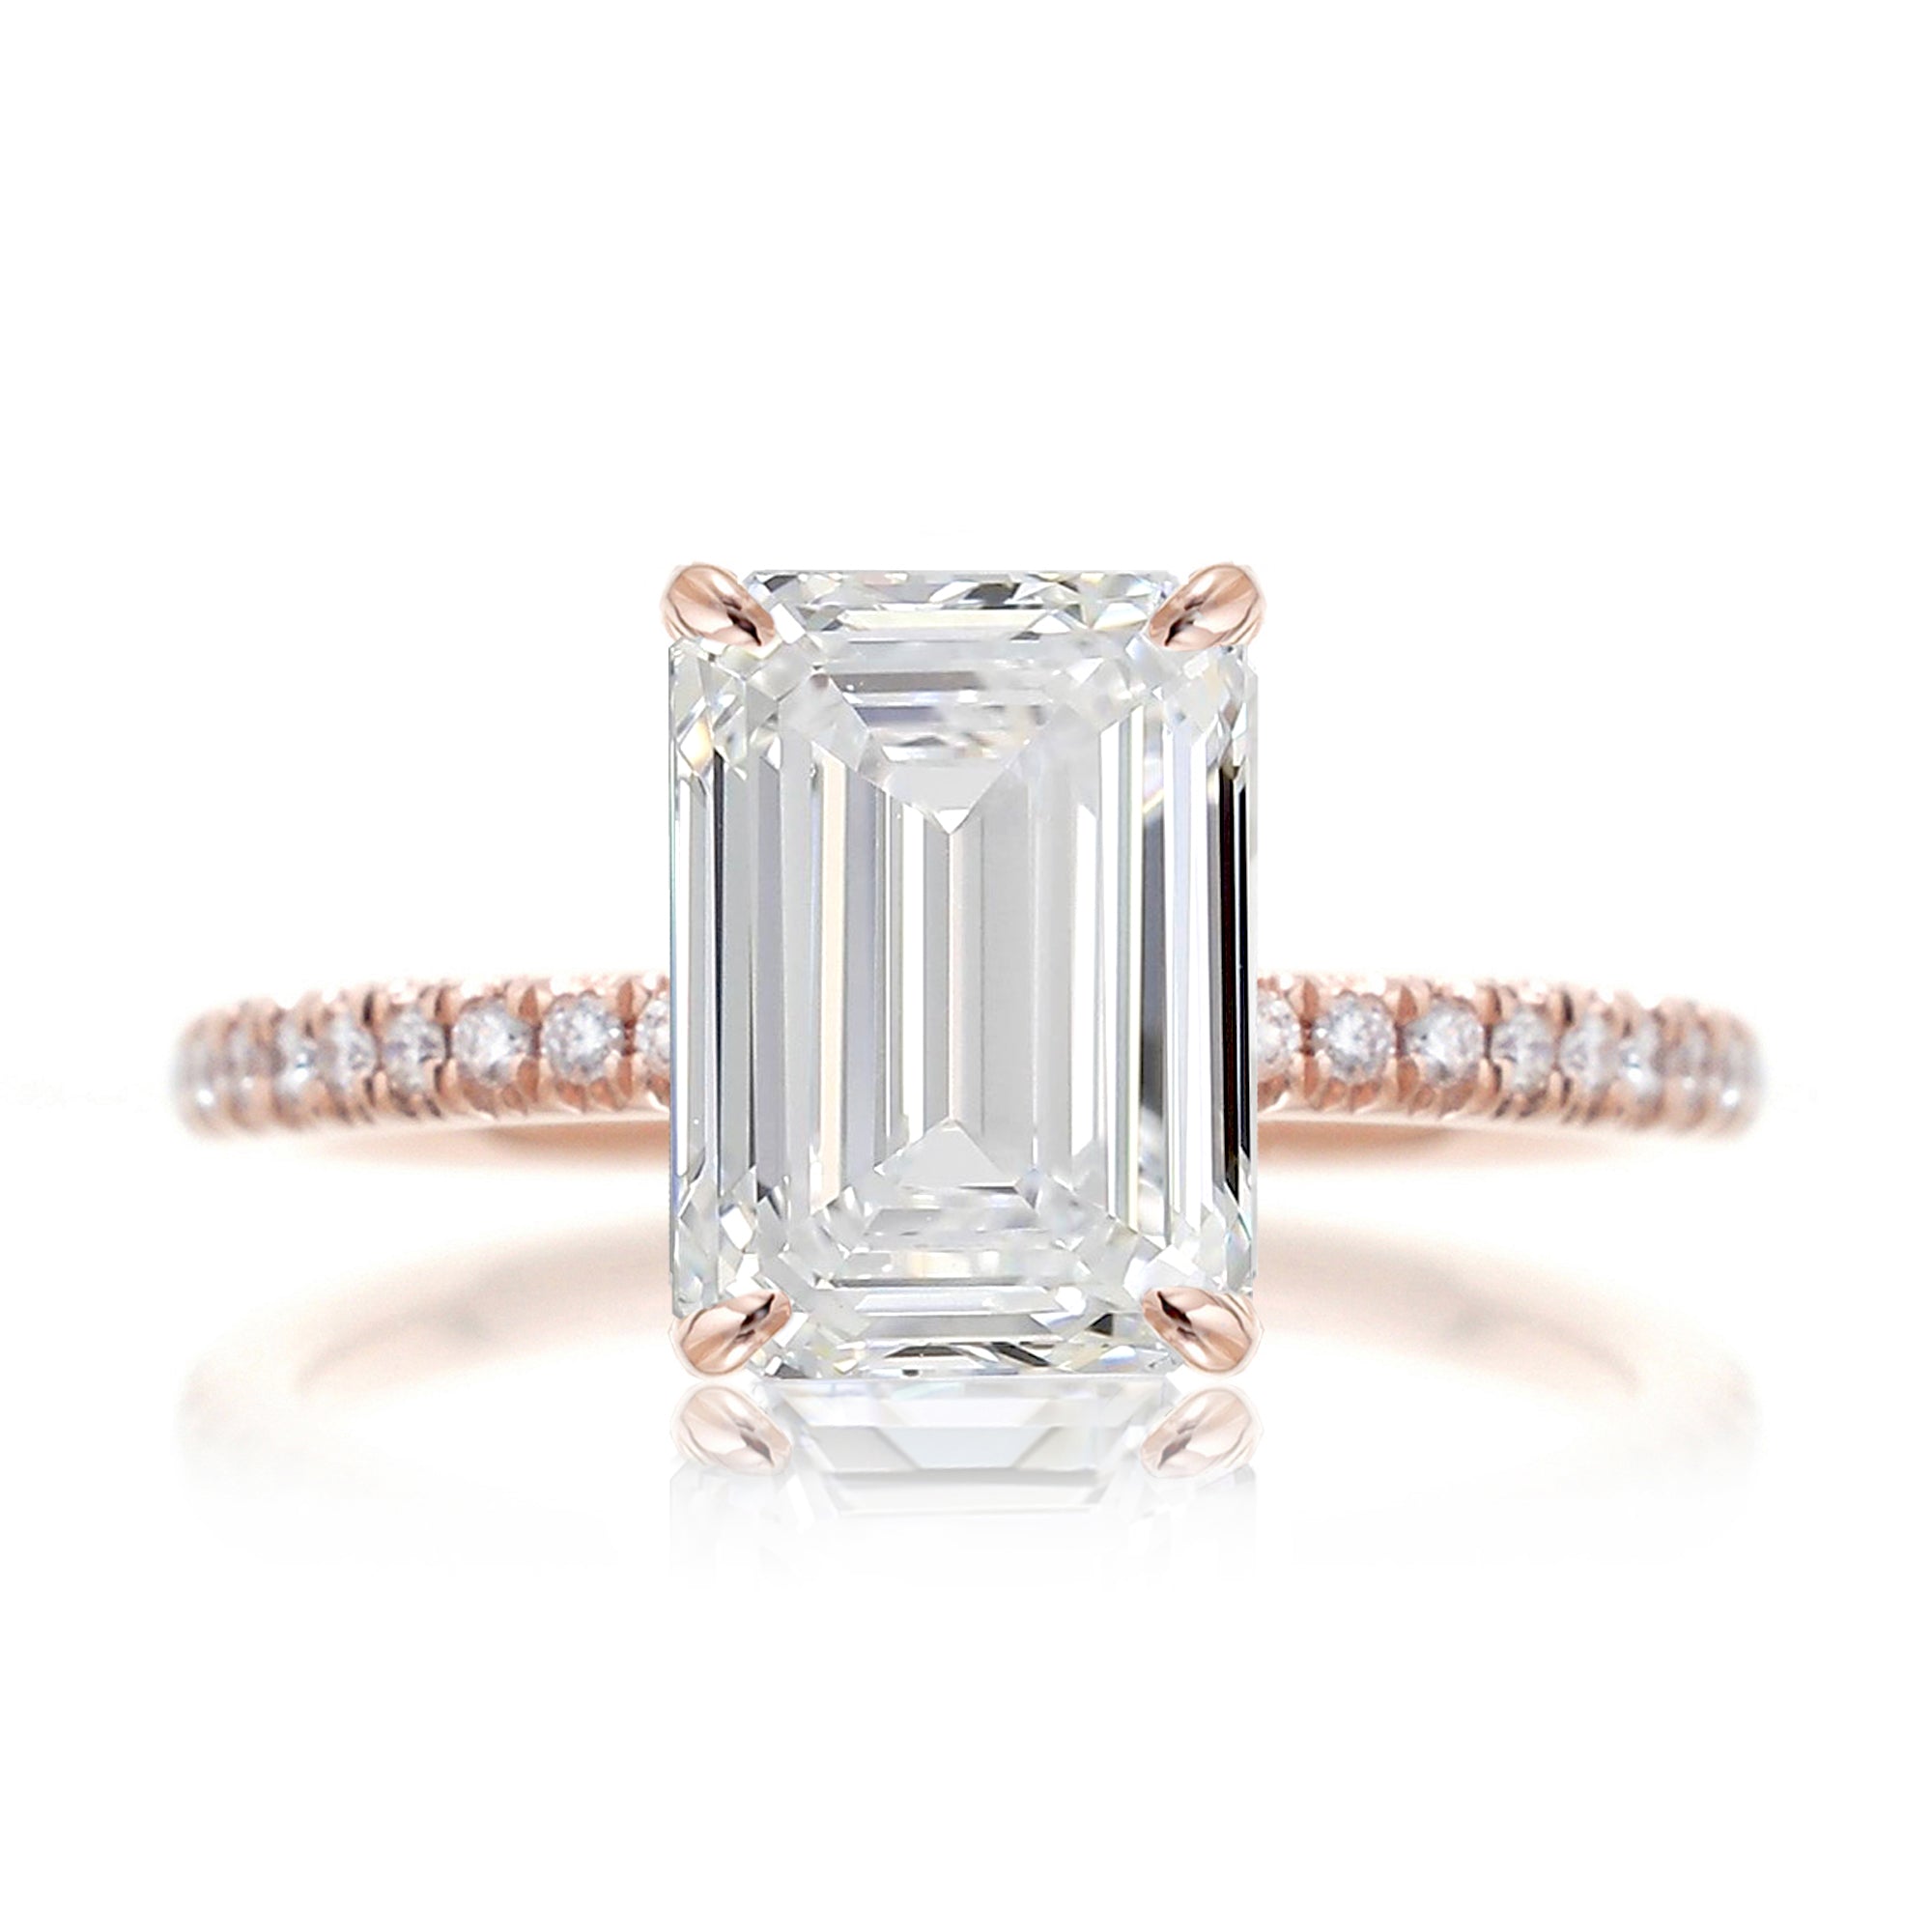 Emerald cut diamond band engagement ring rose gold - the Ava